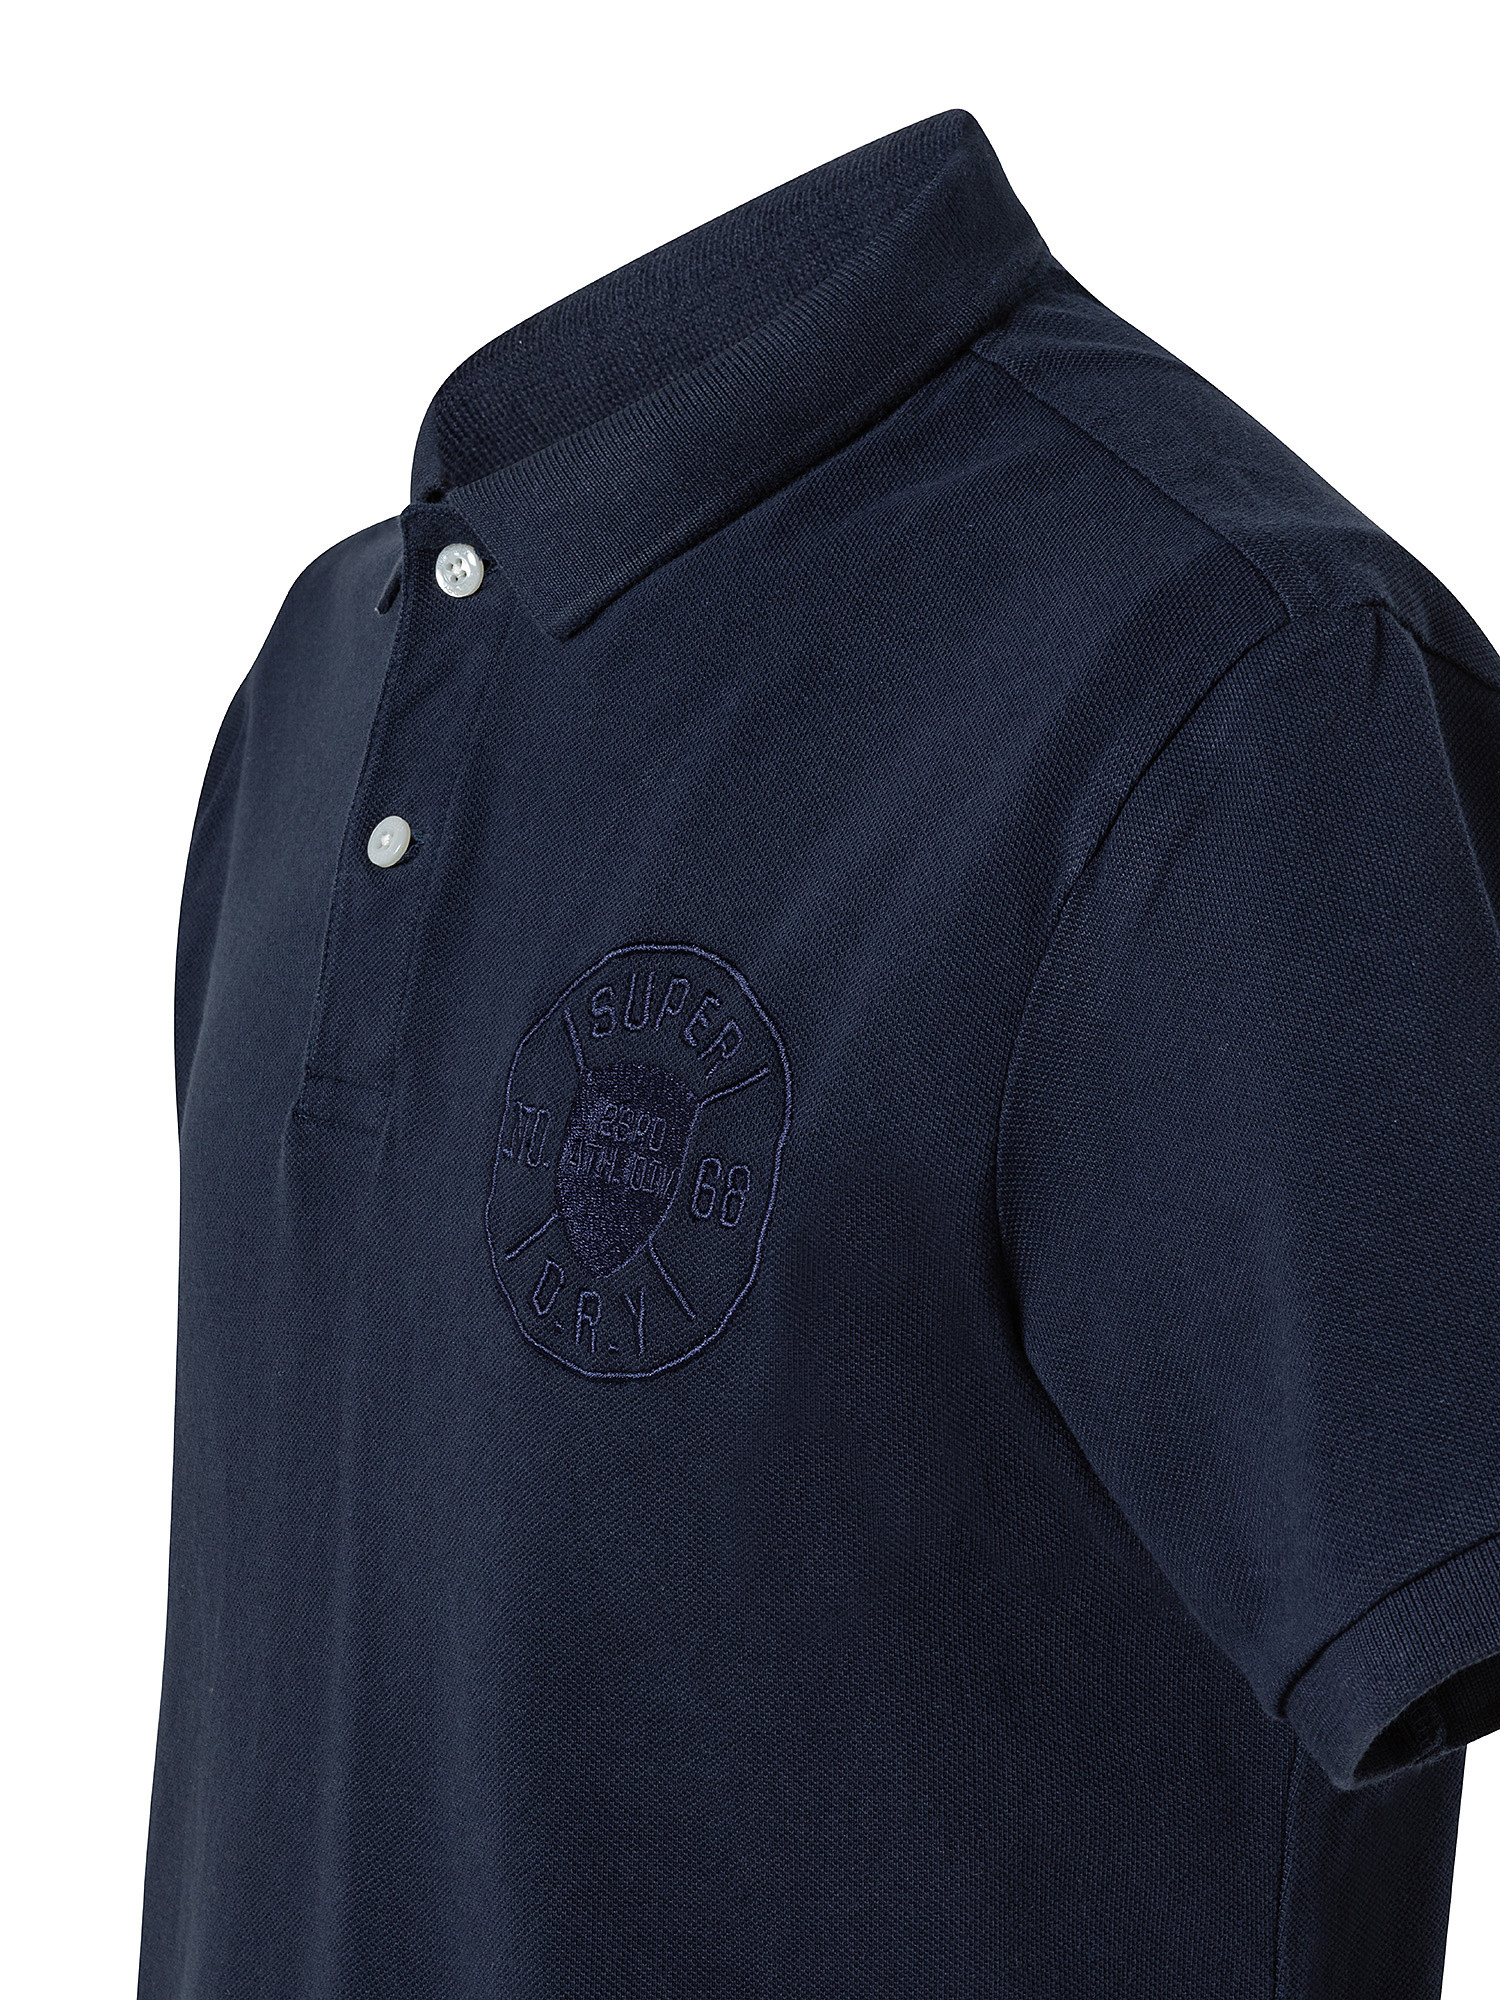 Polo shirt with embroidered graphics, Blue, large image number 2